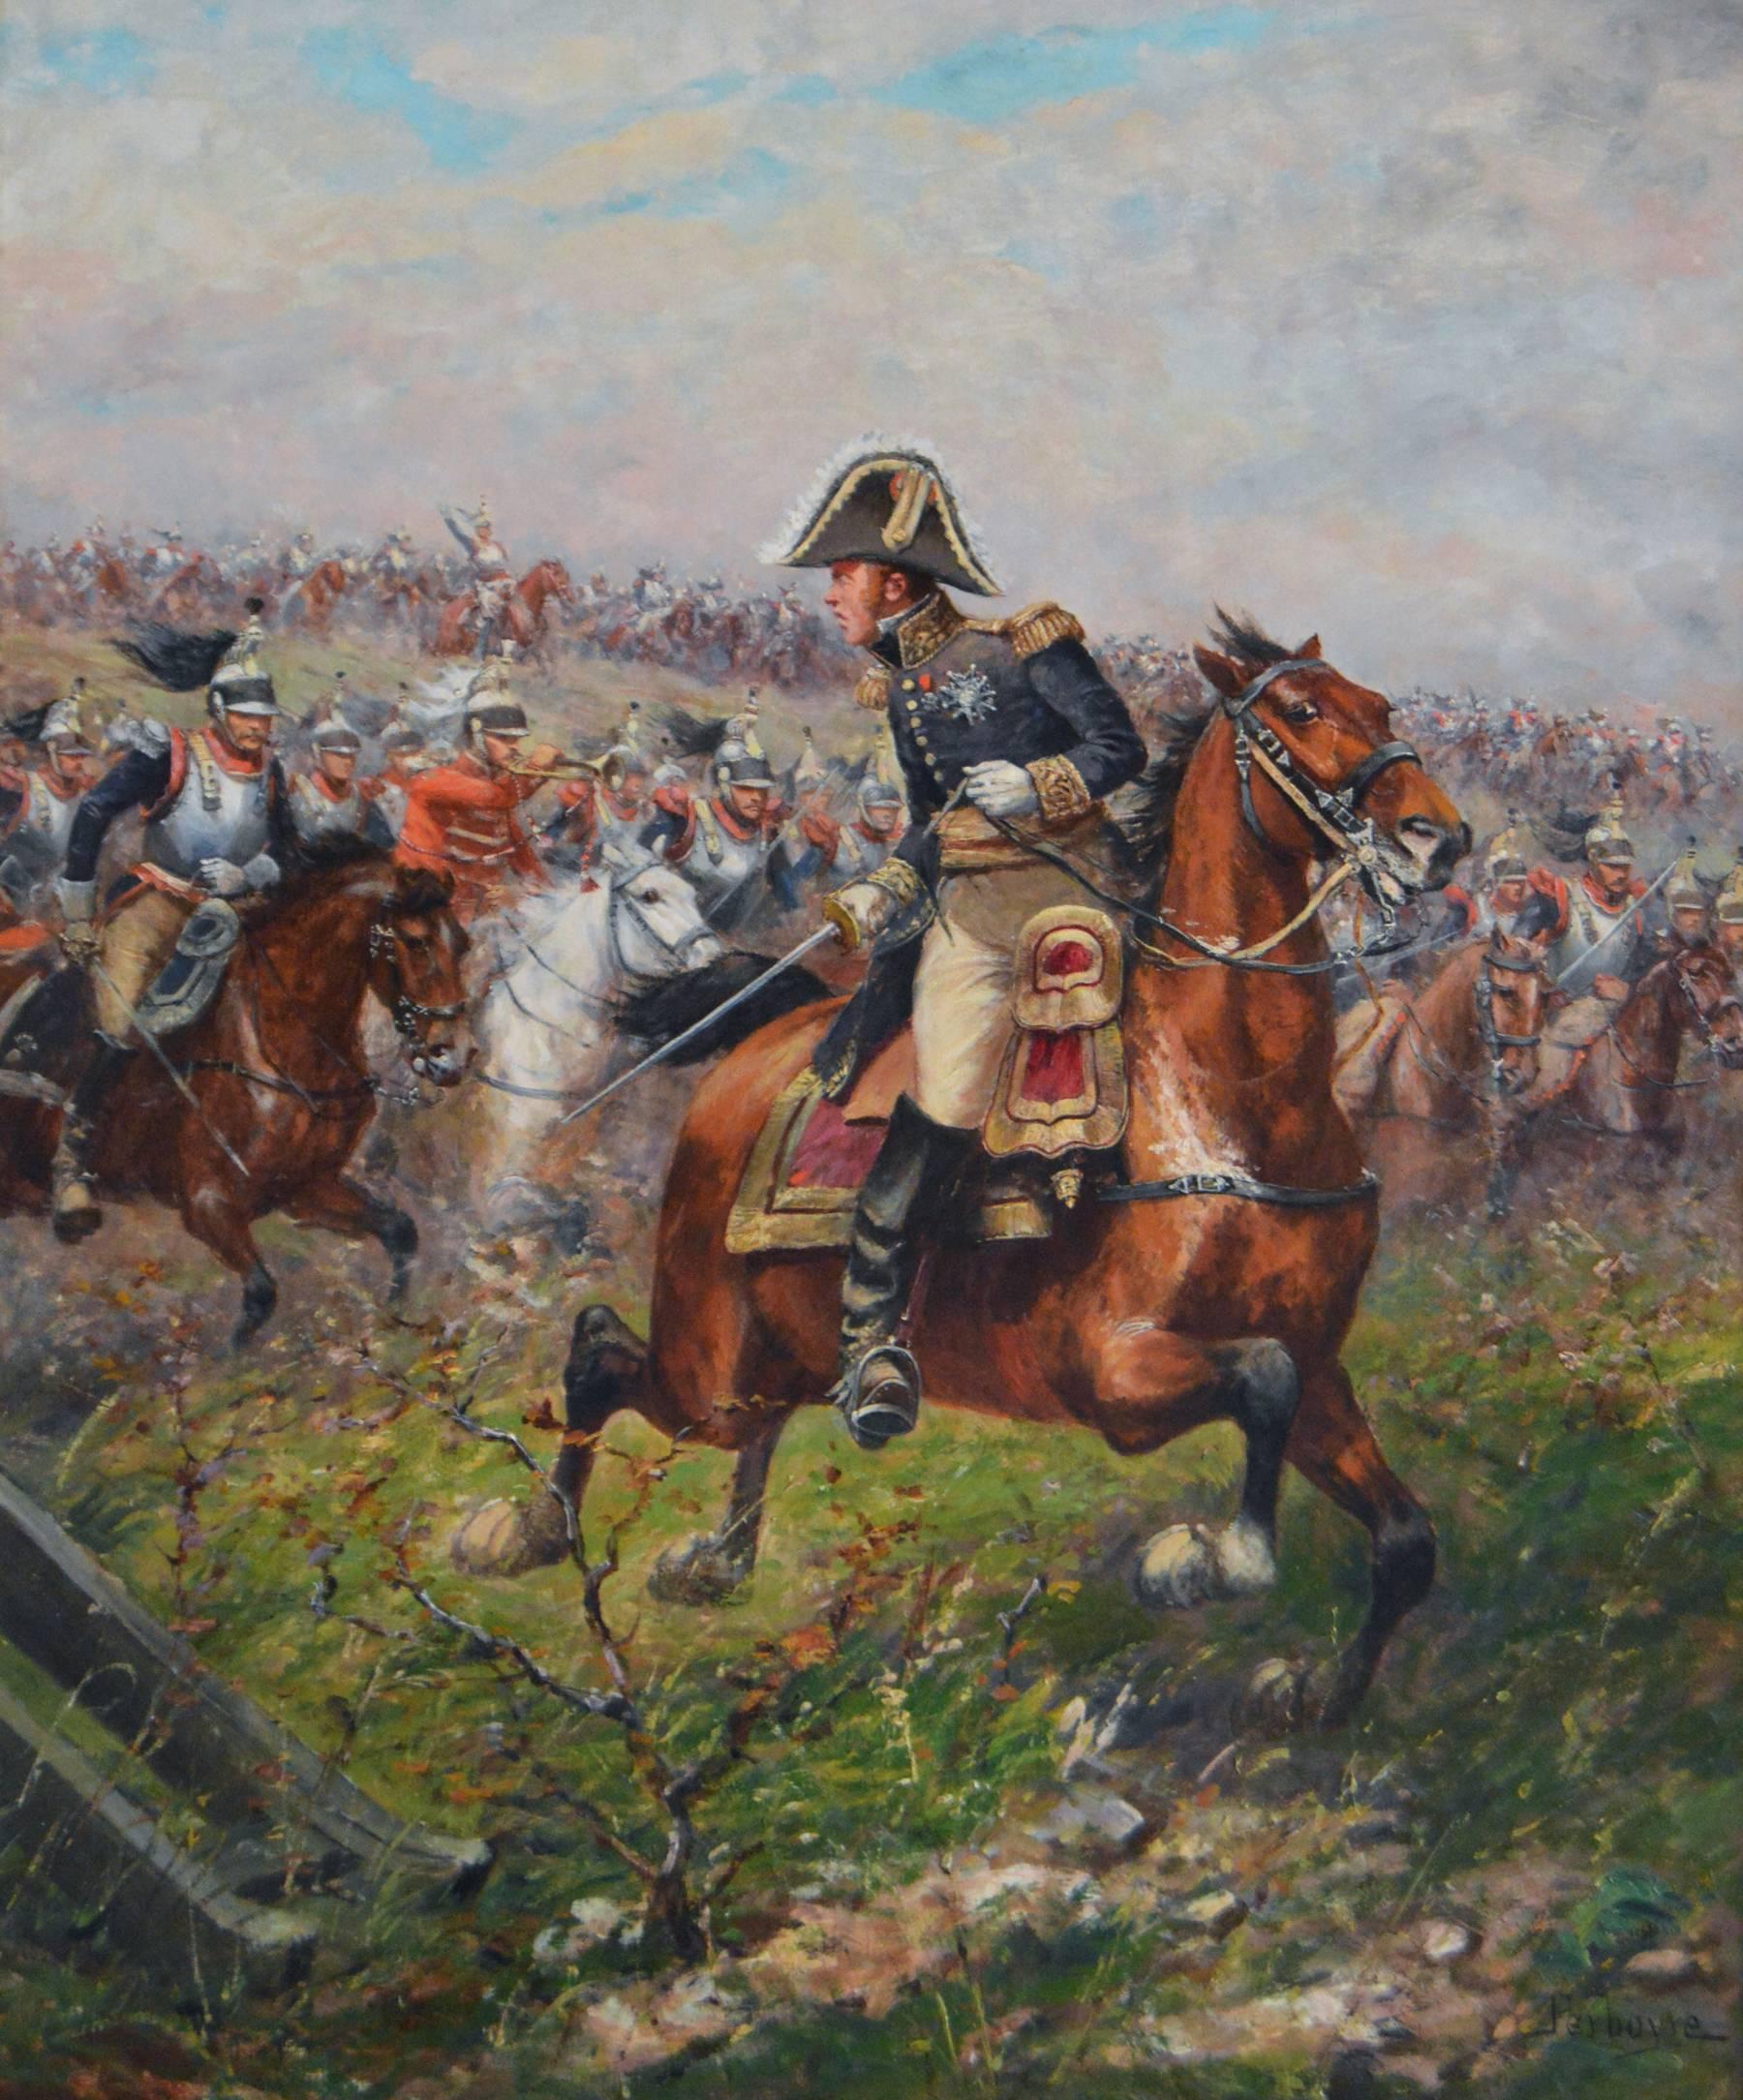 Marshall Ney Leading a Charge of the French Cuirassiers at Waterloo - Painting by Paul Emile Léon Perboyre